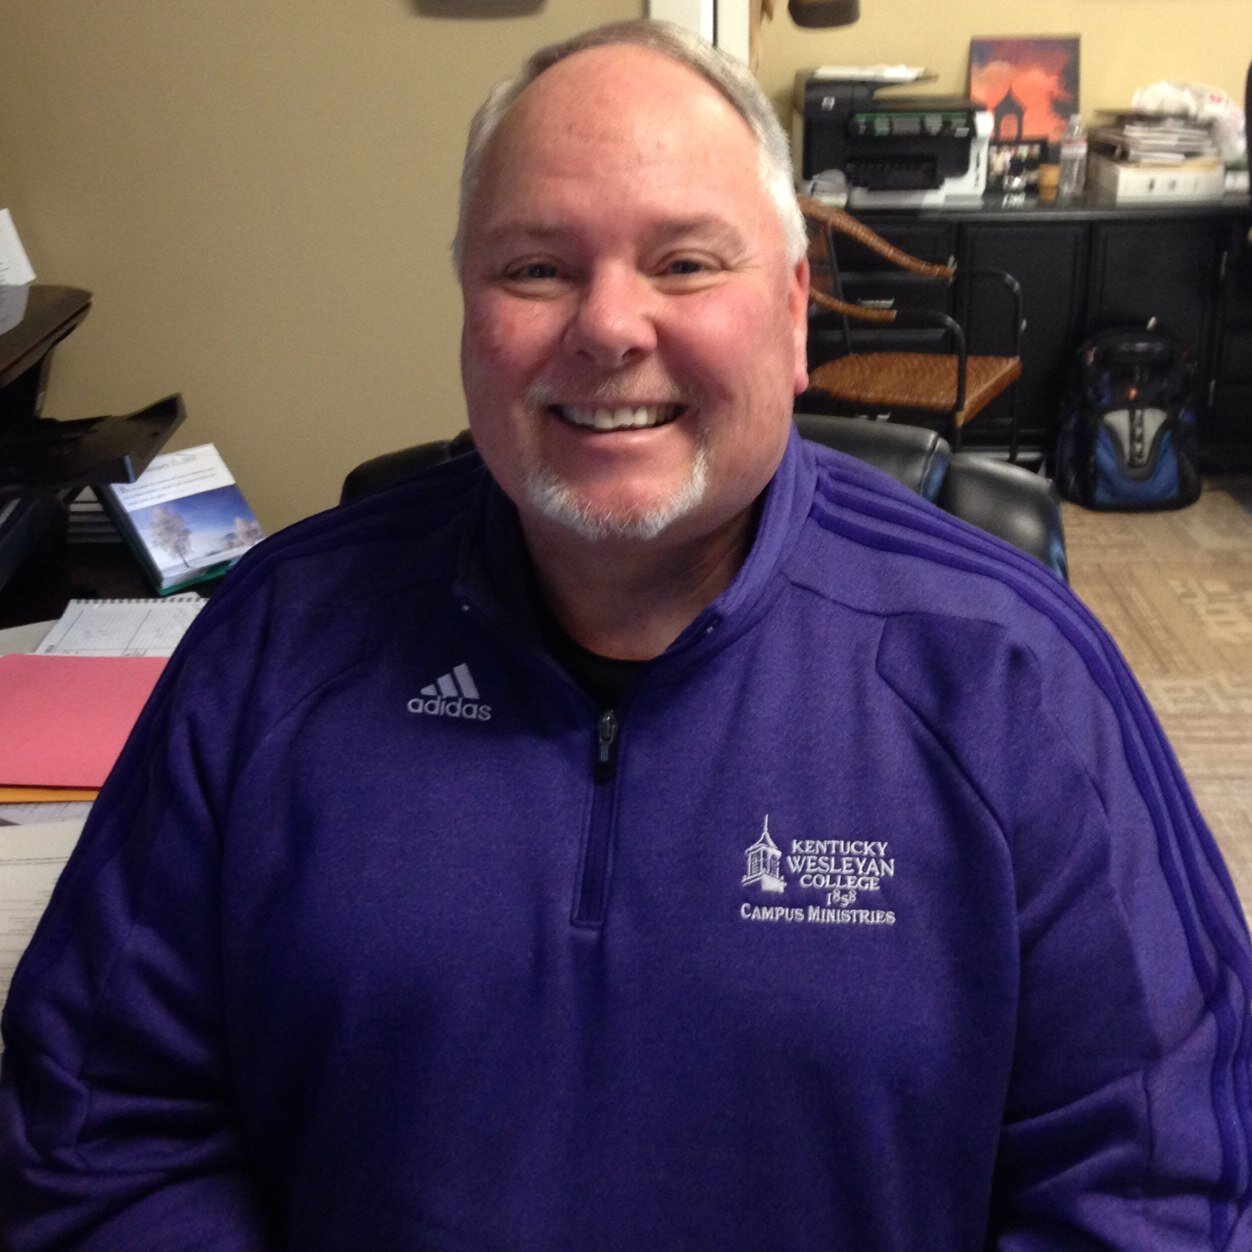 Assistant Chaplain for Athletics and Student Ministries: Kentucky Wesleyan College